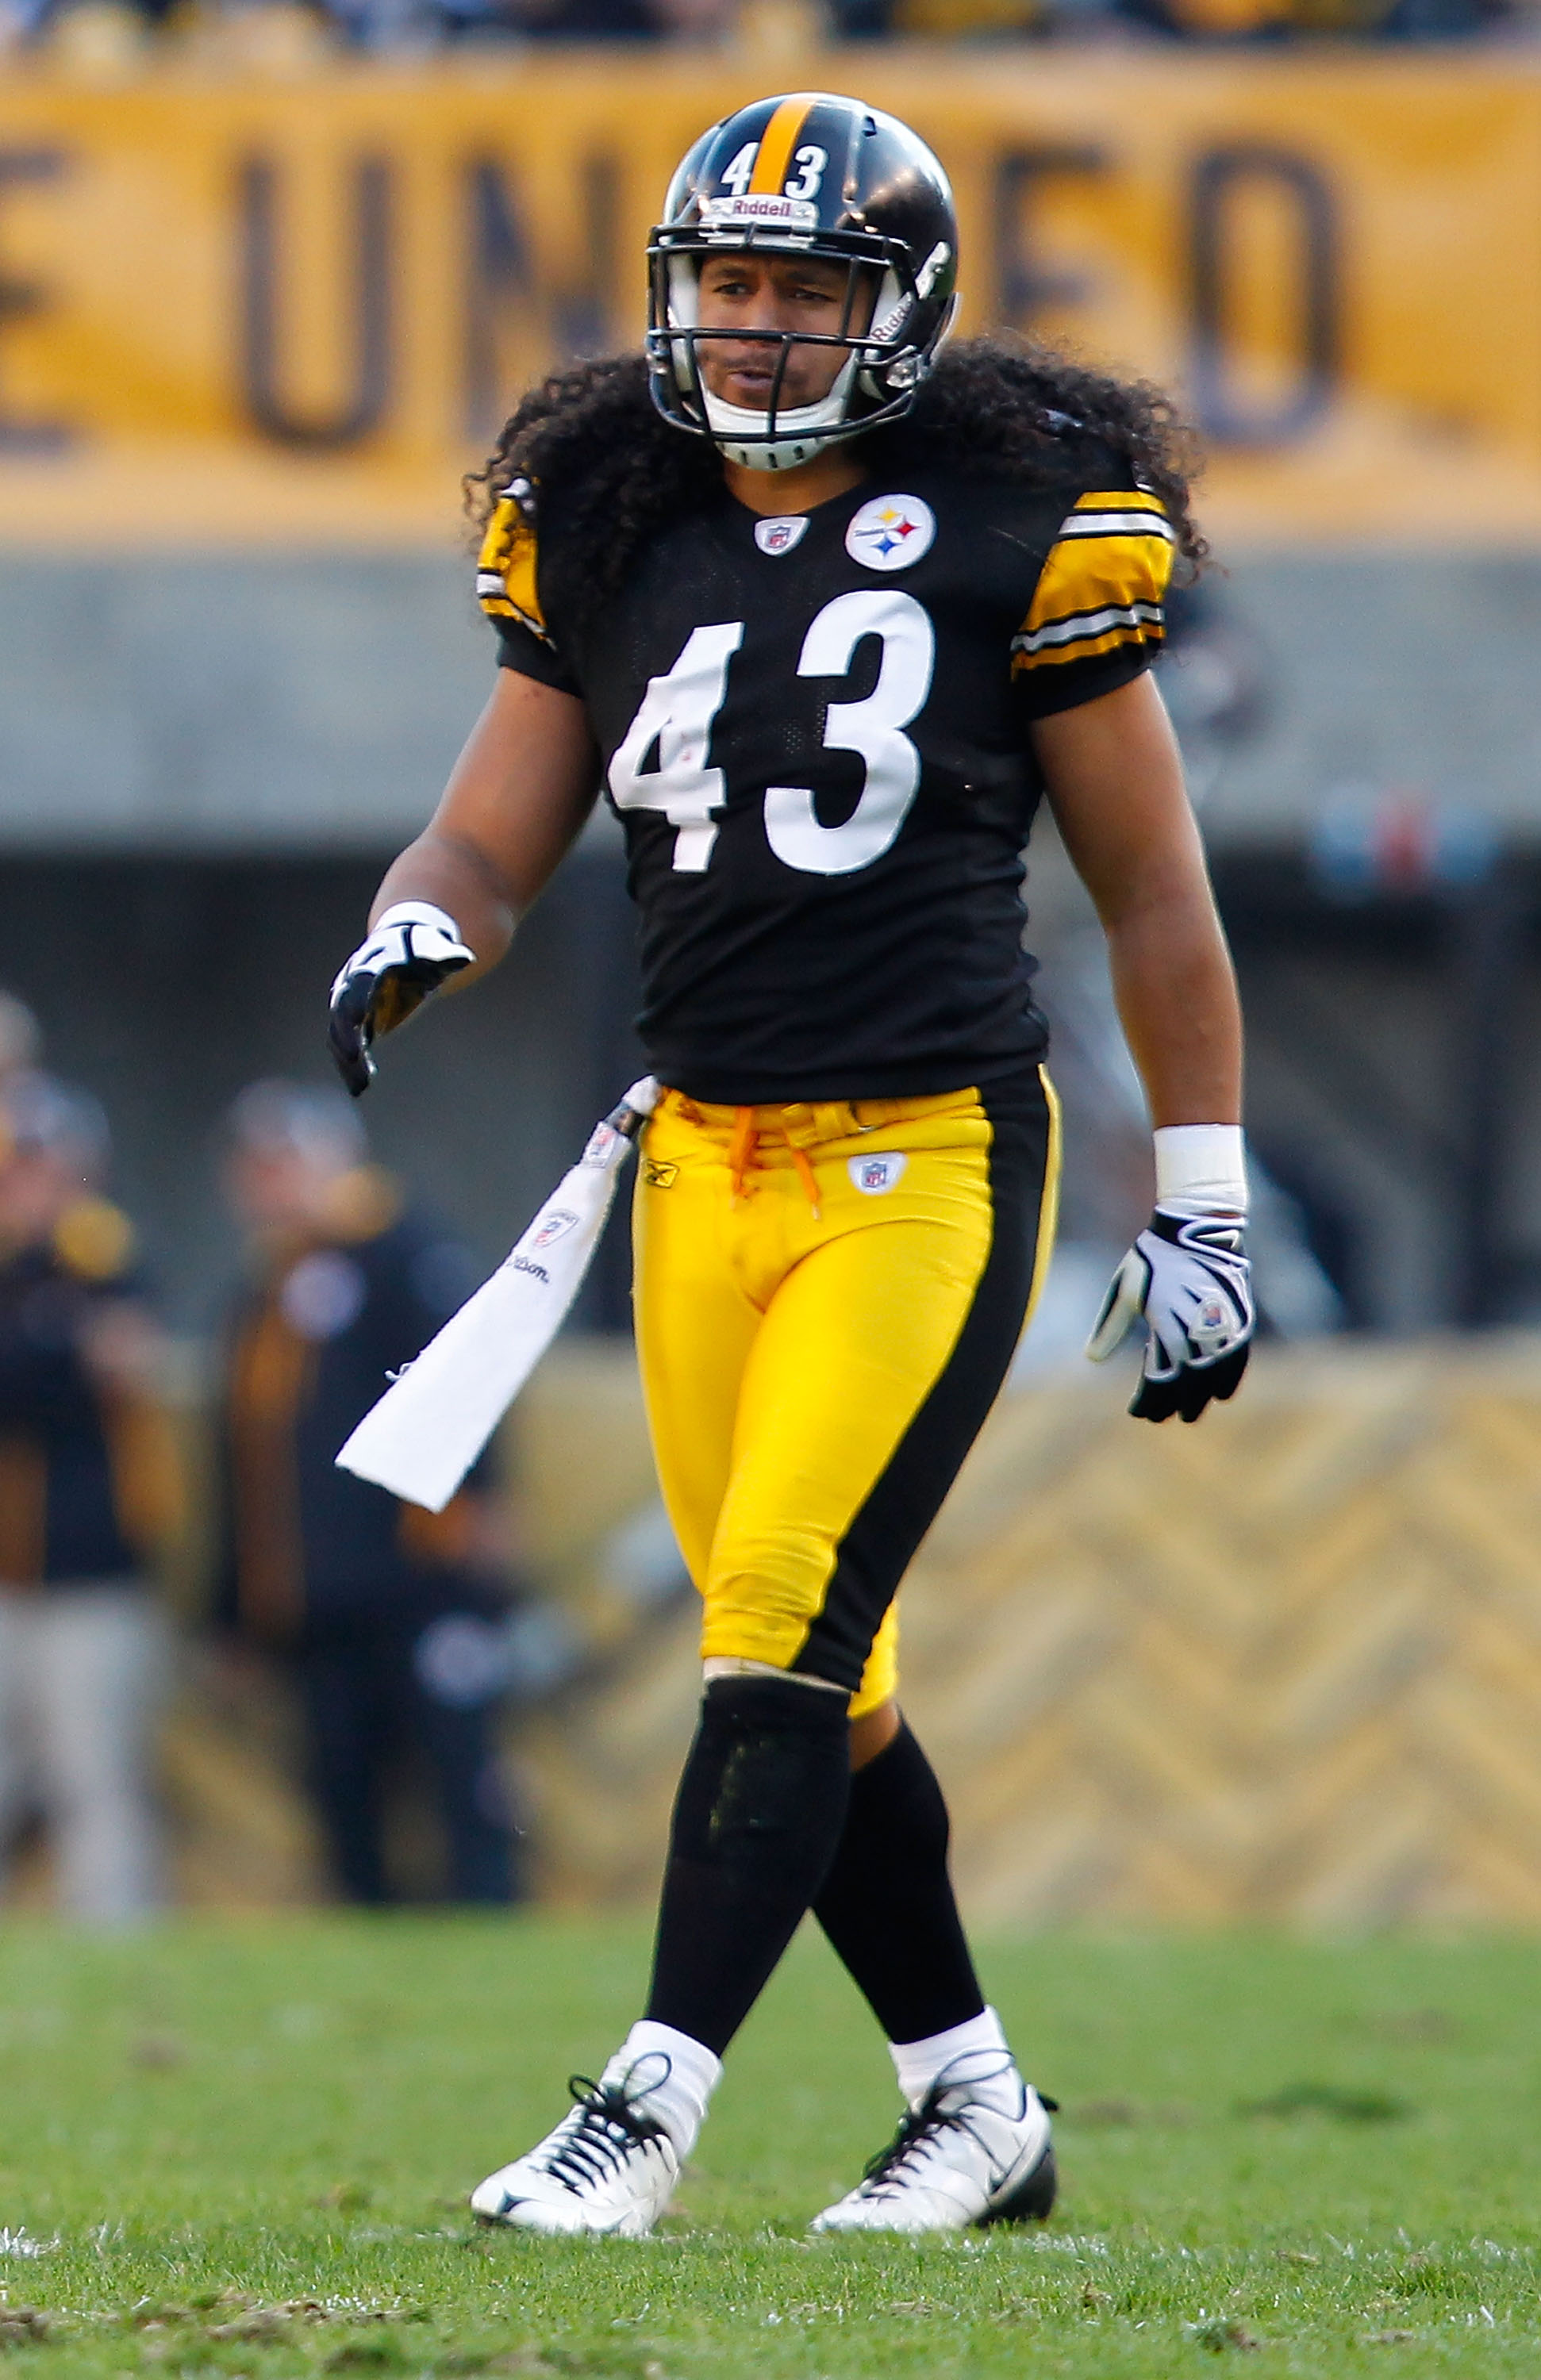 PITTSBURGH, PA - NOVEMBER 21:  Troy Polamalu #43 of the Pittsburgh Steelers lines up before the snap during the game against  the Oakland Raiders on November 21, 2010 at Heinz Field in Pittsburgh, Pennsylvania.  (Photo by Jared Wickerham/Getty Images)